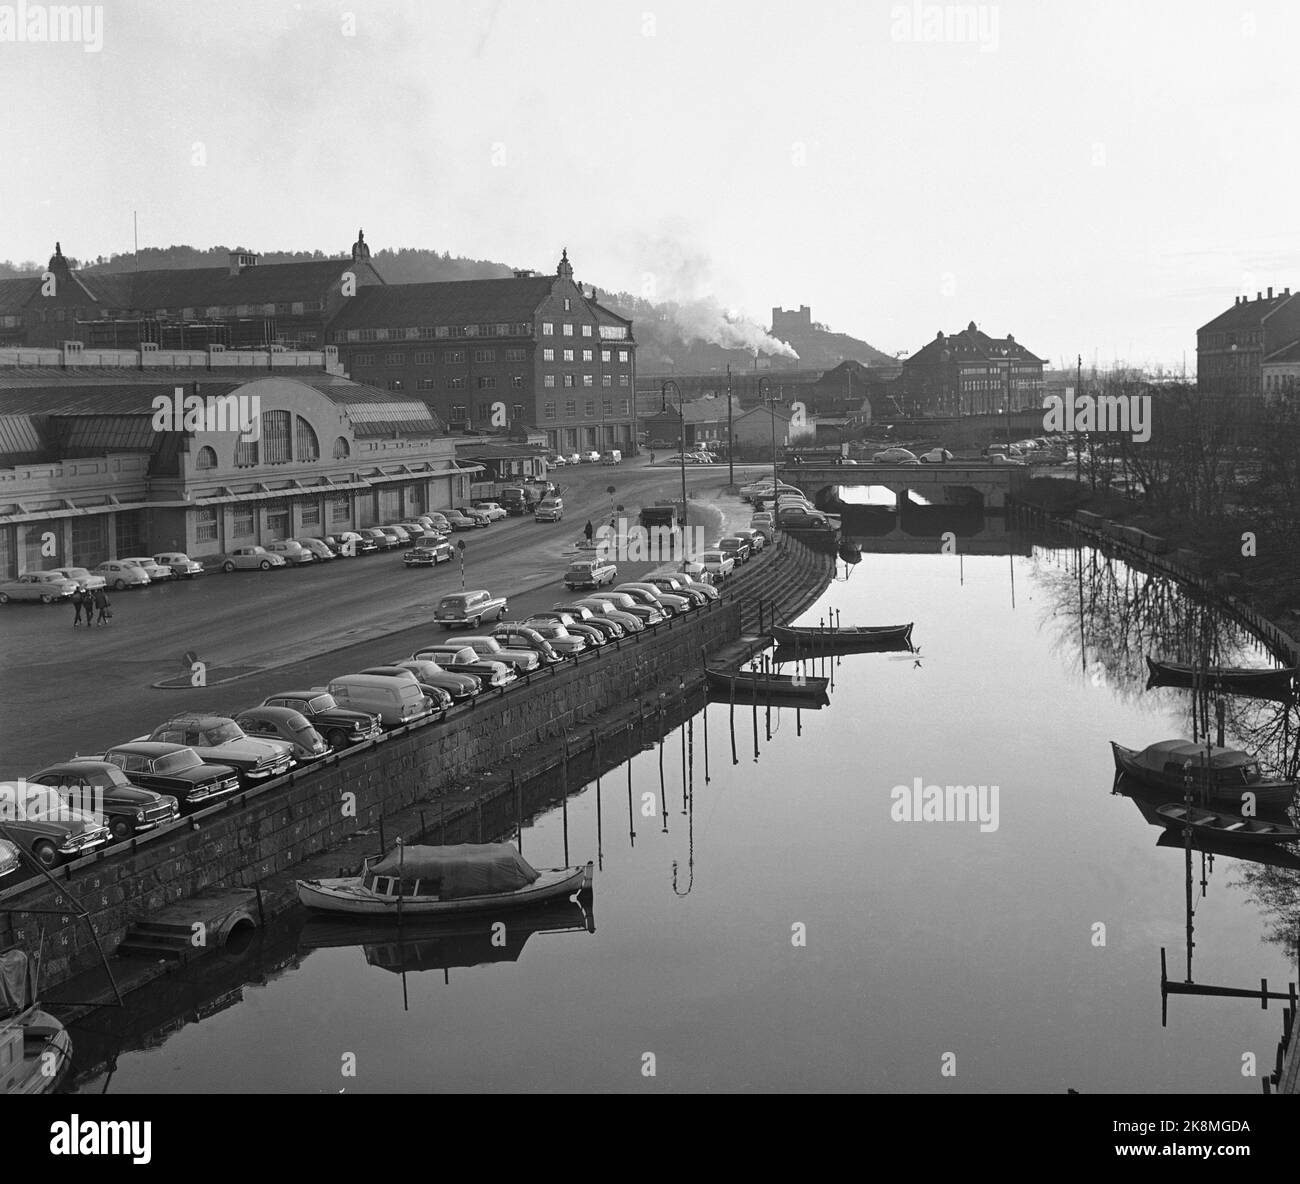 Oslo November 14, 1963. The Akerselva, the old Felles slaughterhouse, is located t.v. In the picture, Greenland's peat with housing and shops are here today. In the large building in front of Ekebergåsen, the Customs Administration is located. The Akerselva today goes under the Postgiro building and you can still sail up to Greenland's peat, but then in the tunnel the first piece. The photo is taken from Brugata, on the bridge itself that still exists. Photo: Henrik Laurvik / NTB / NTB Stock Photo